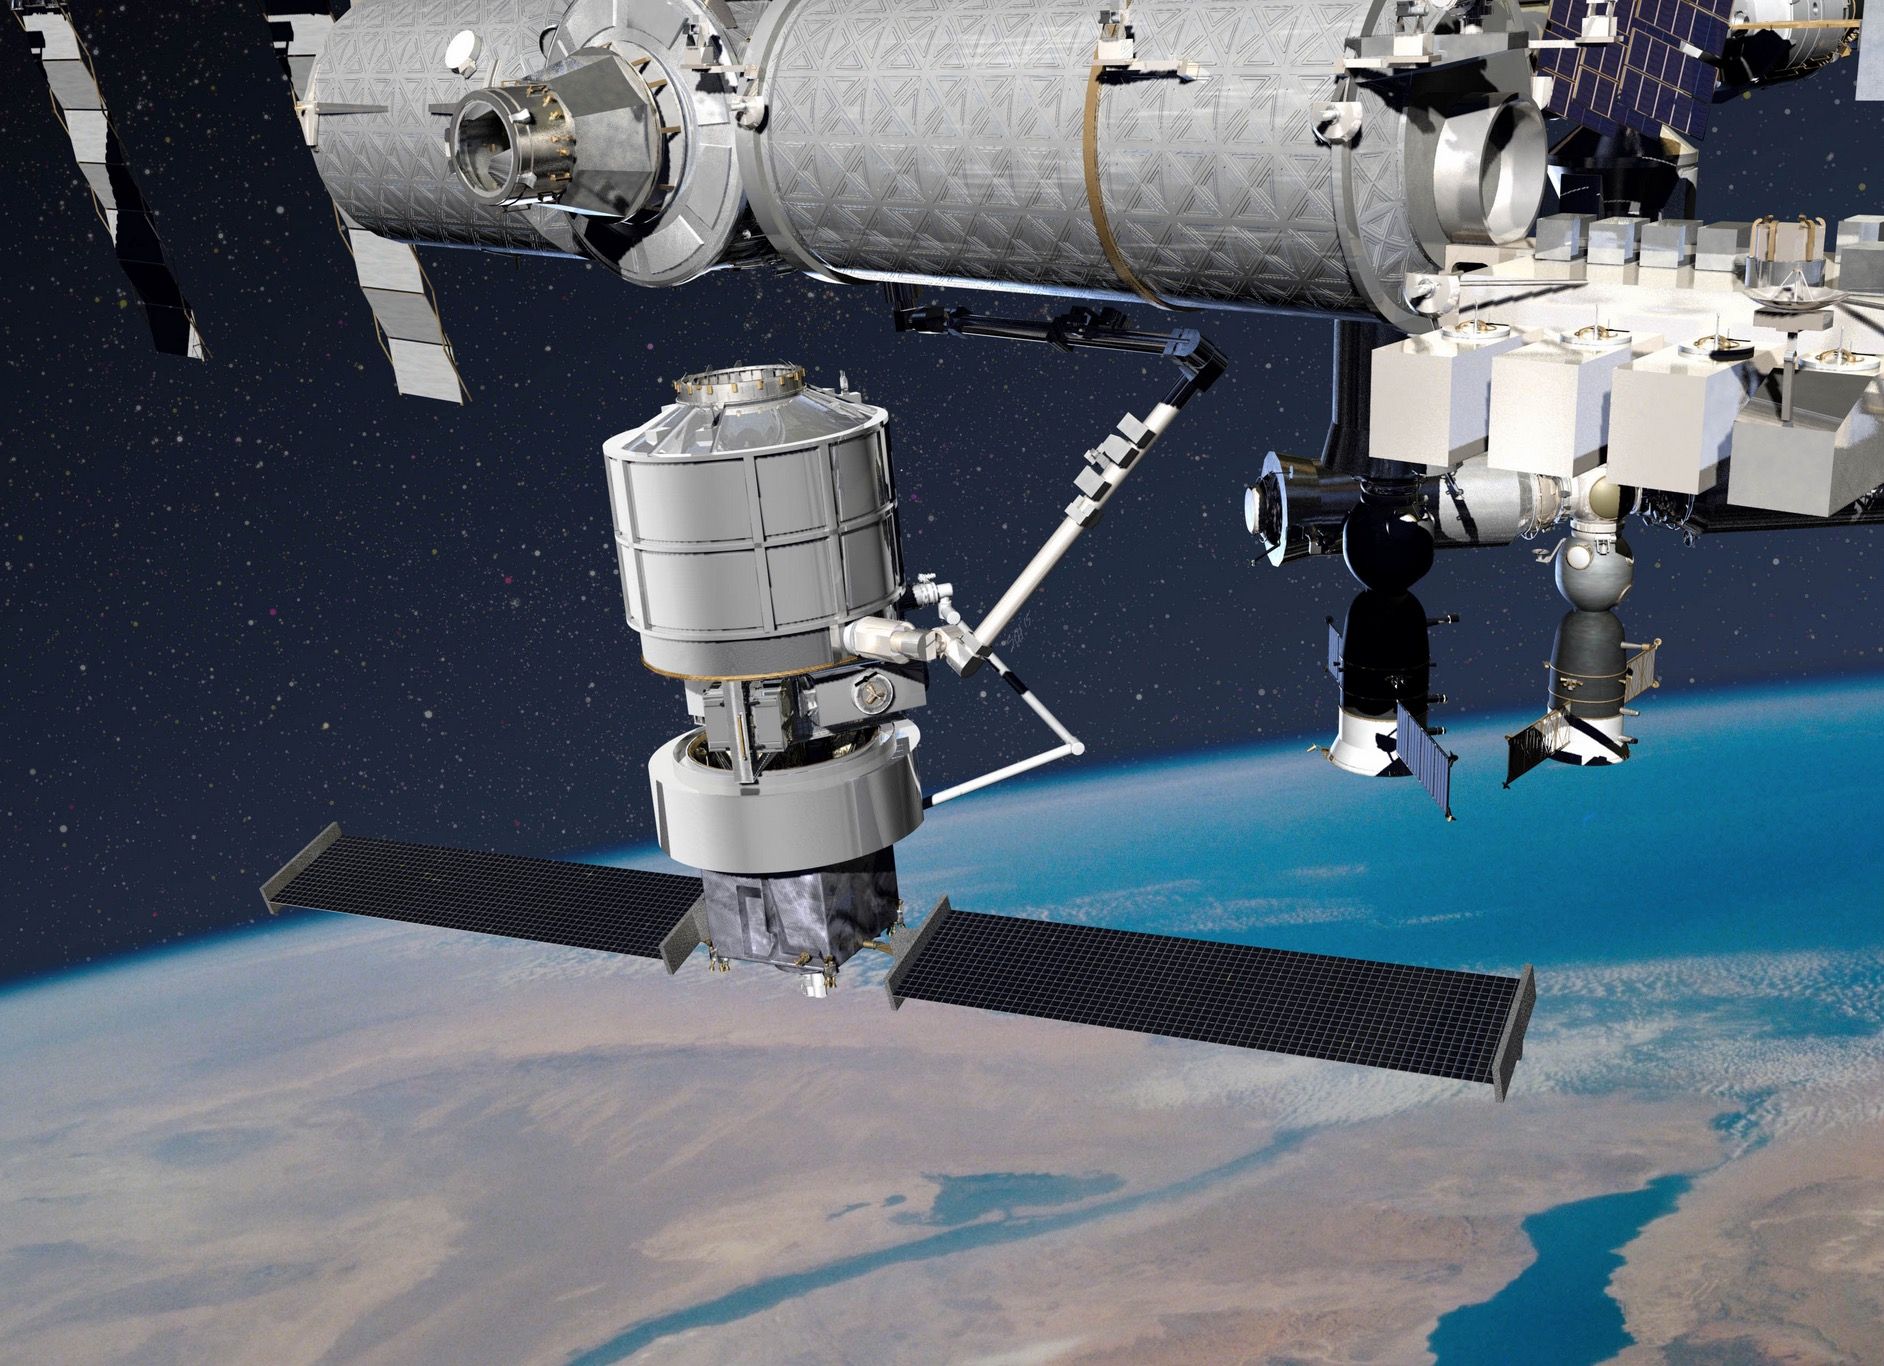 lockheed martin pitches to nasa a new spaceship for resupplying iss deep space missions image 1